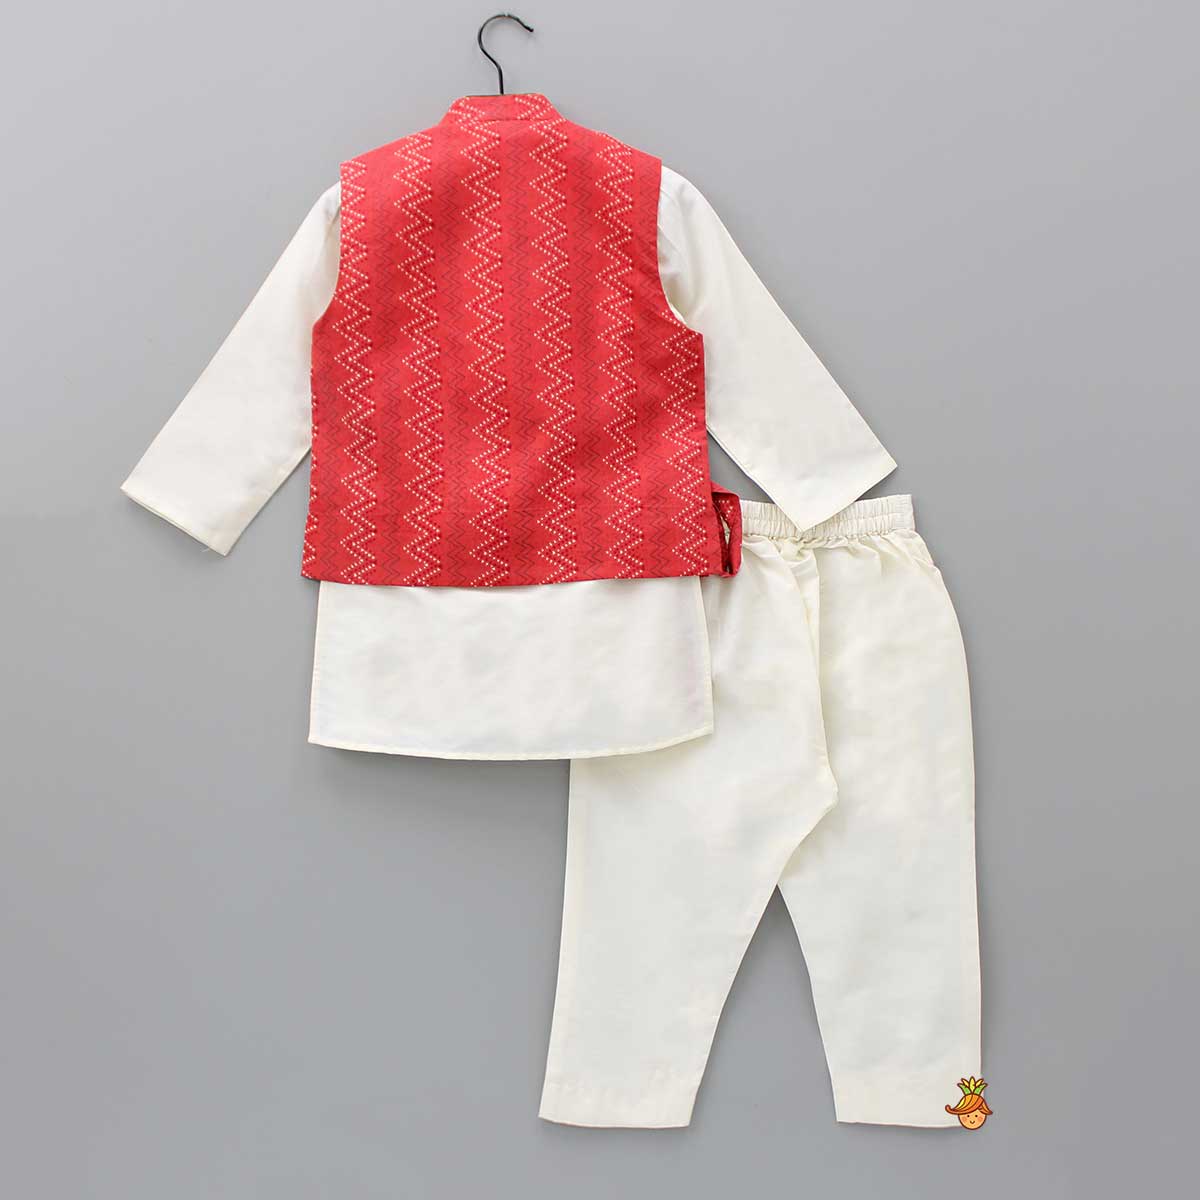 Off White Kurta With Side Knot Detail Printed Red Jacket And Pyjama